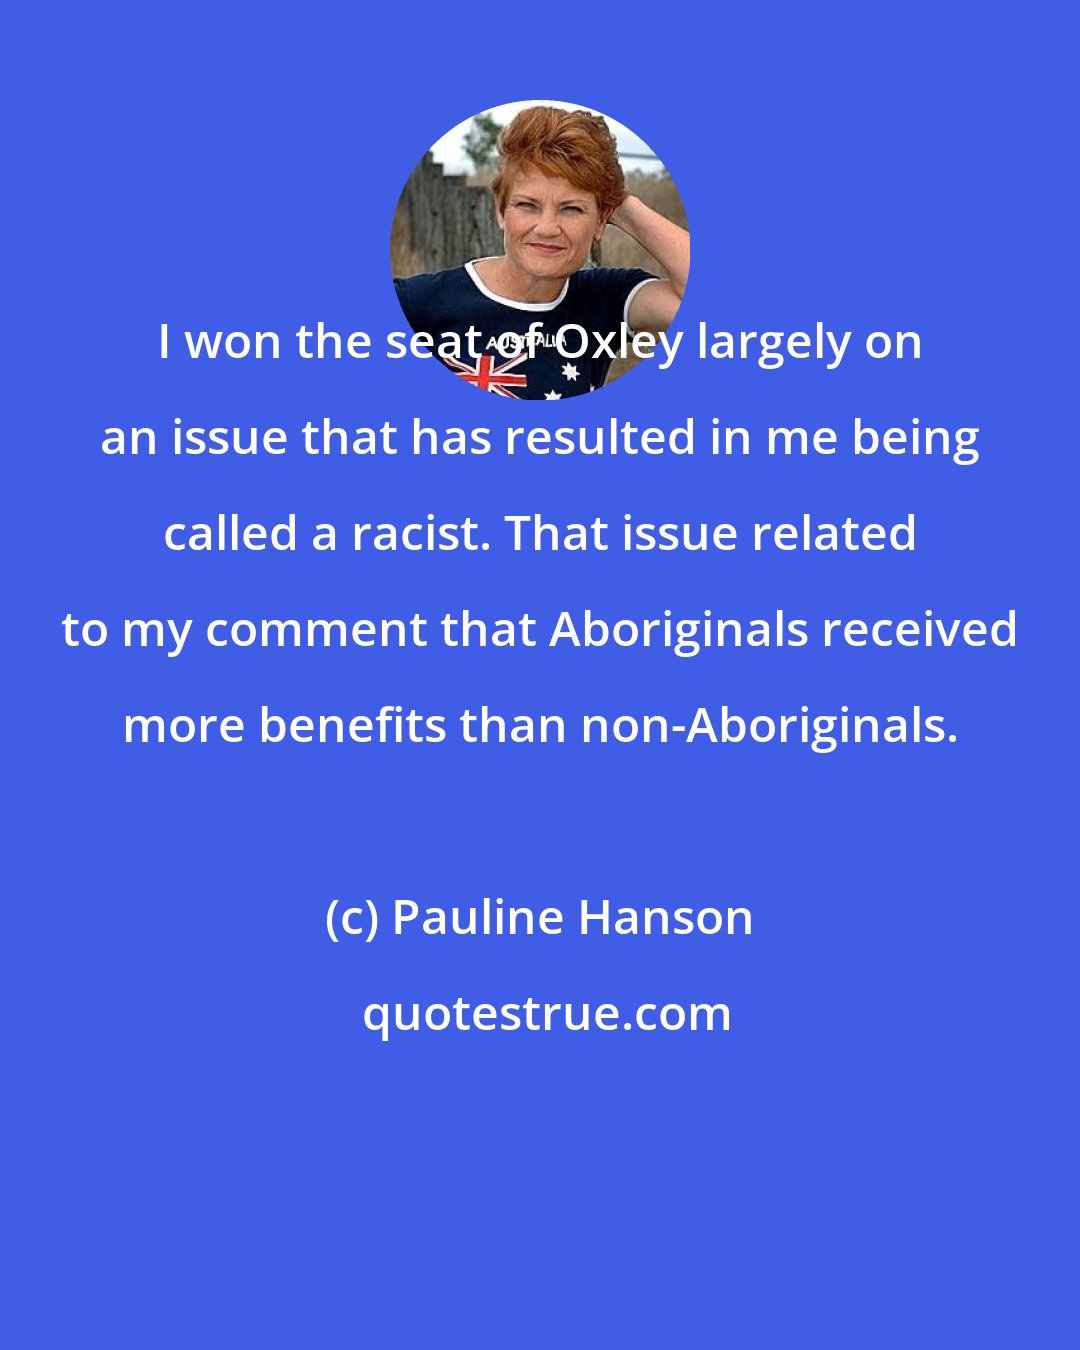 Pauline Hanson: I won the seat of Oxley largely on an issue that has resulted in me being called a racist. That issue related to my comment that Aboriginals received more benefits than non-Aboriginals.